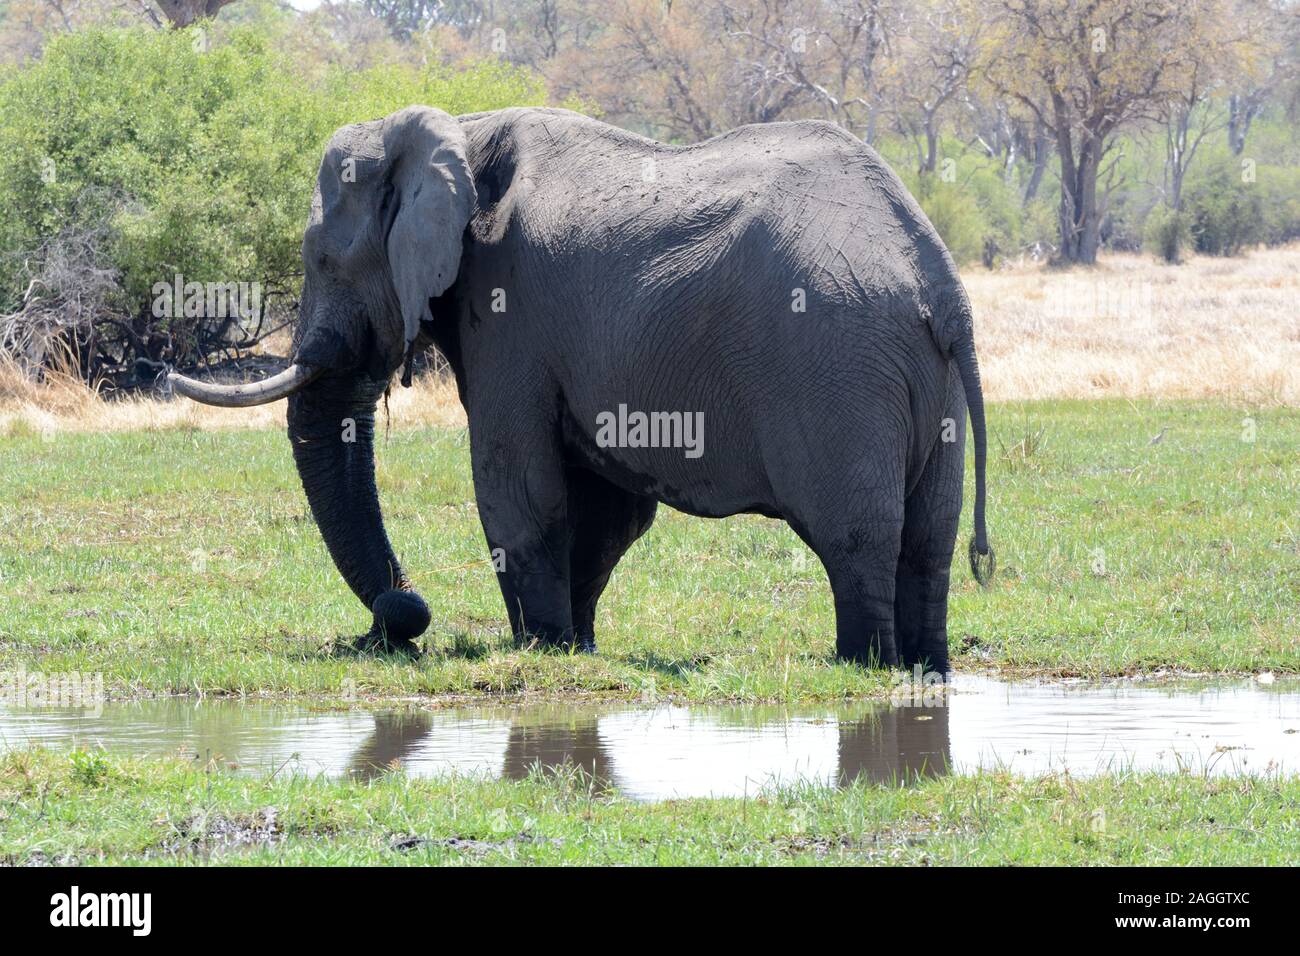 Large male African elephant drinking water from a swamp Moremi national park Moremi Wildlife park Botswana Africa Stock Photo